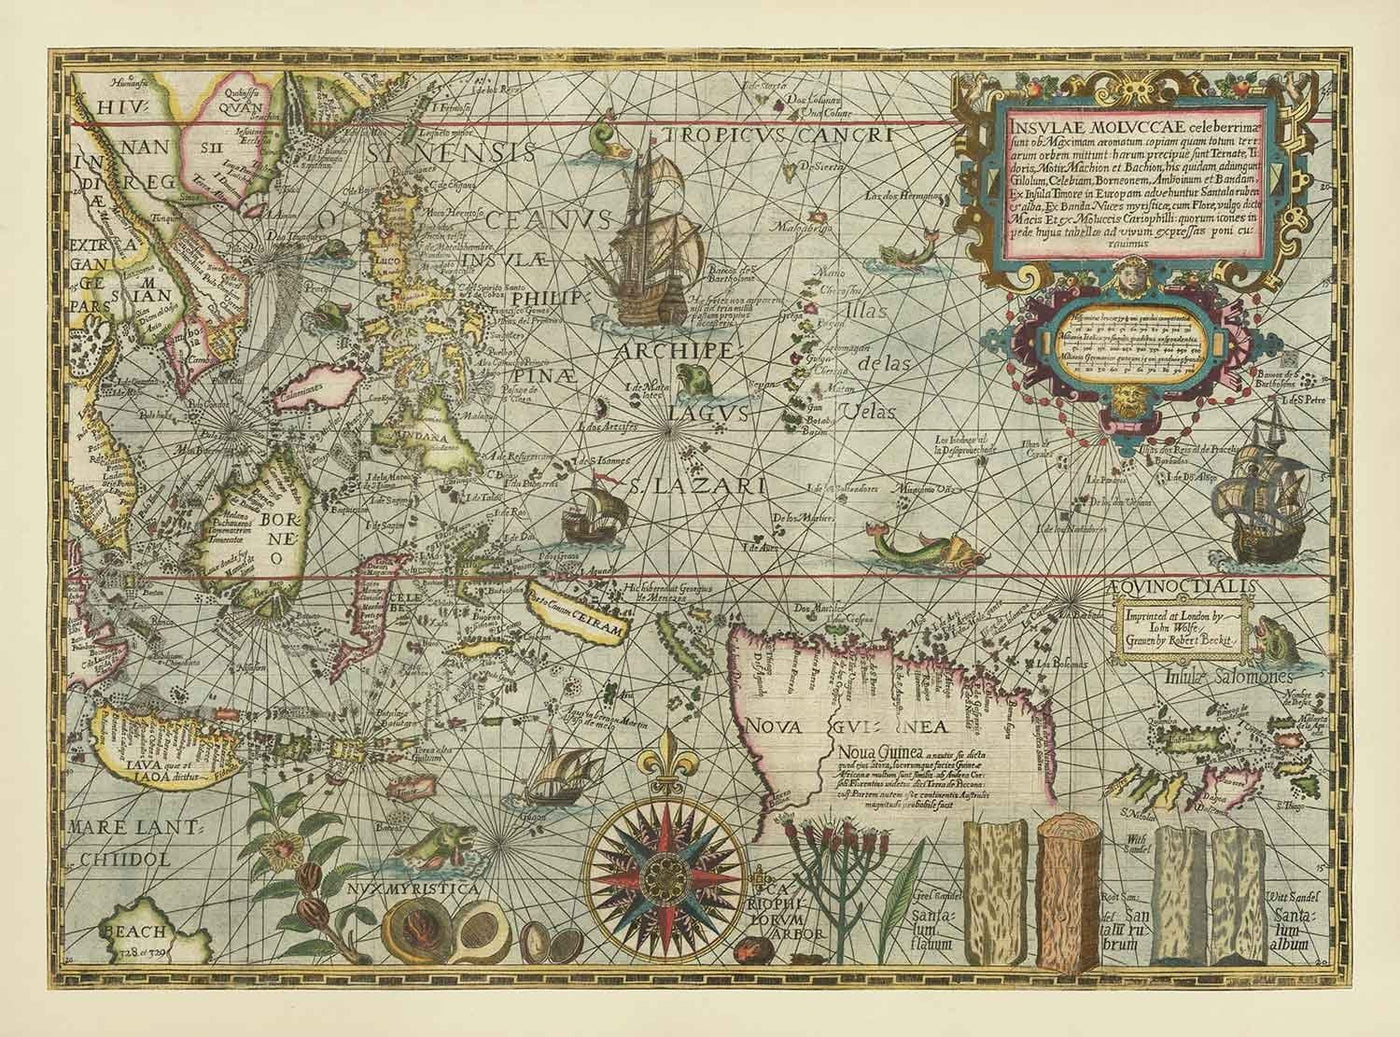 Old Spice Isles Map of Southeast Asia, 1598 by Wolfe - Dutch East Indies - Indonesia, Philippines, Singapore, Borneo, Sea Monsters